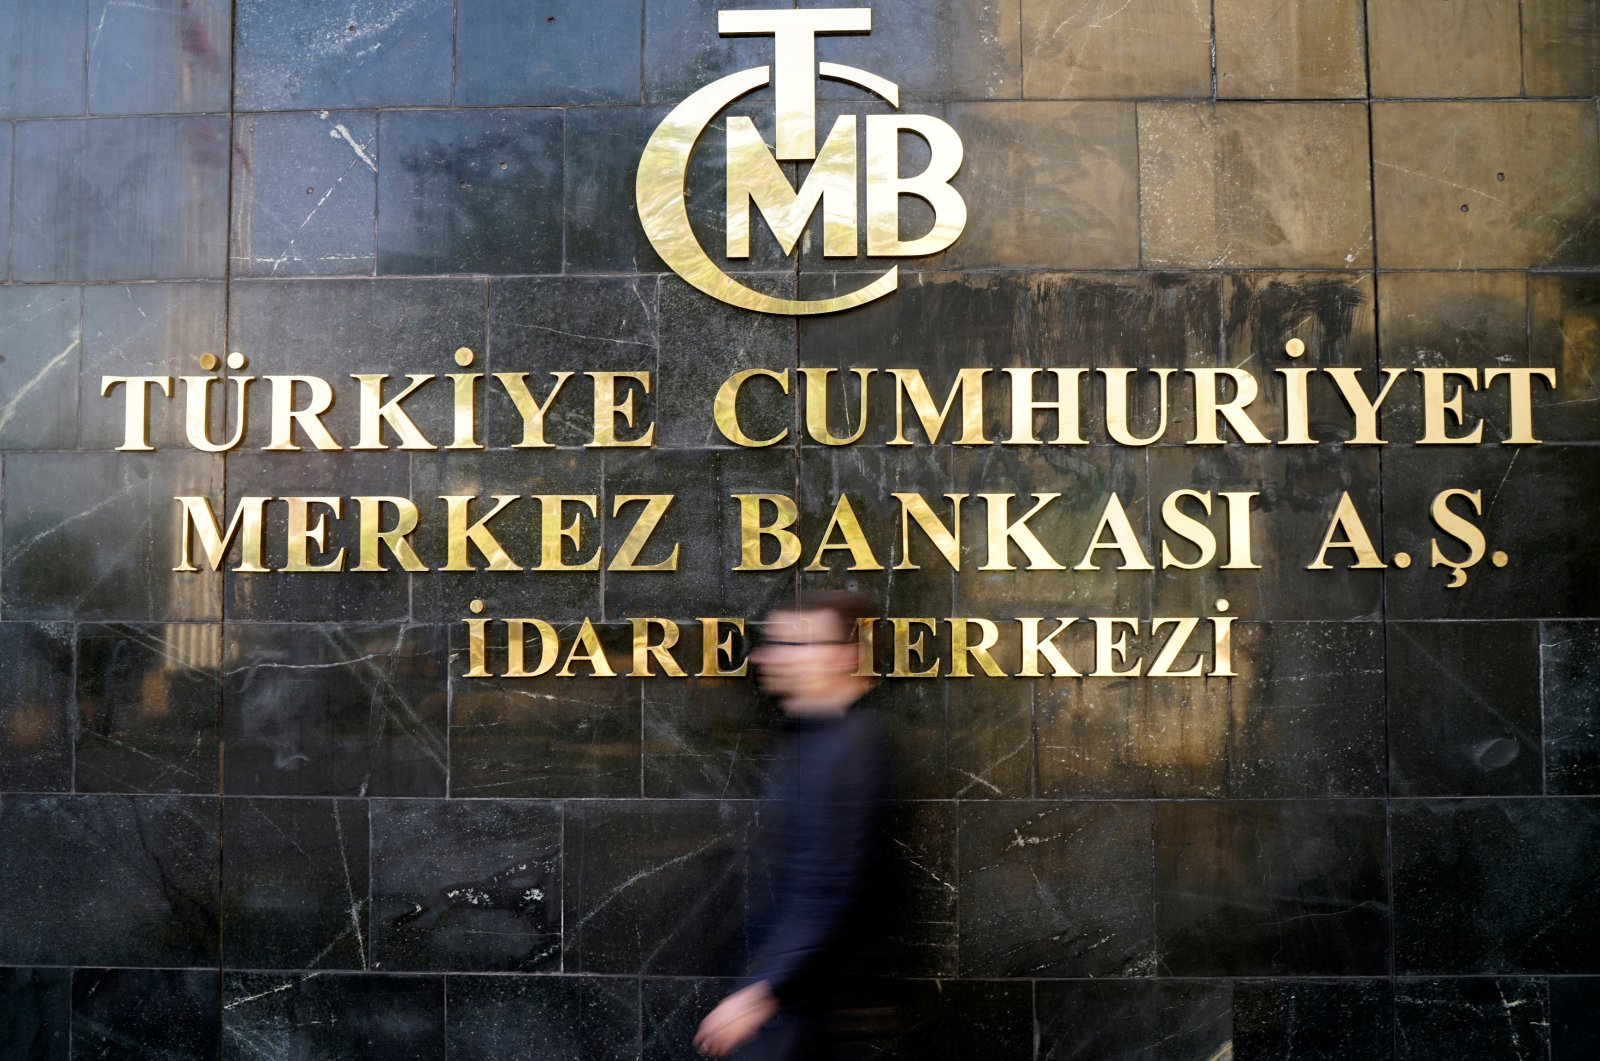 A man leaves Turkey's Central Bank headquarters in Ankara, Turkey, April 19, 2015. (Reuters File Photo)